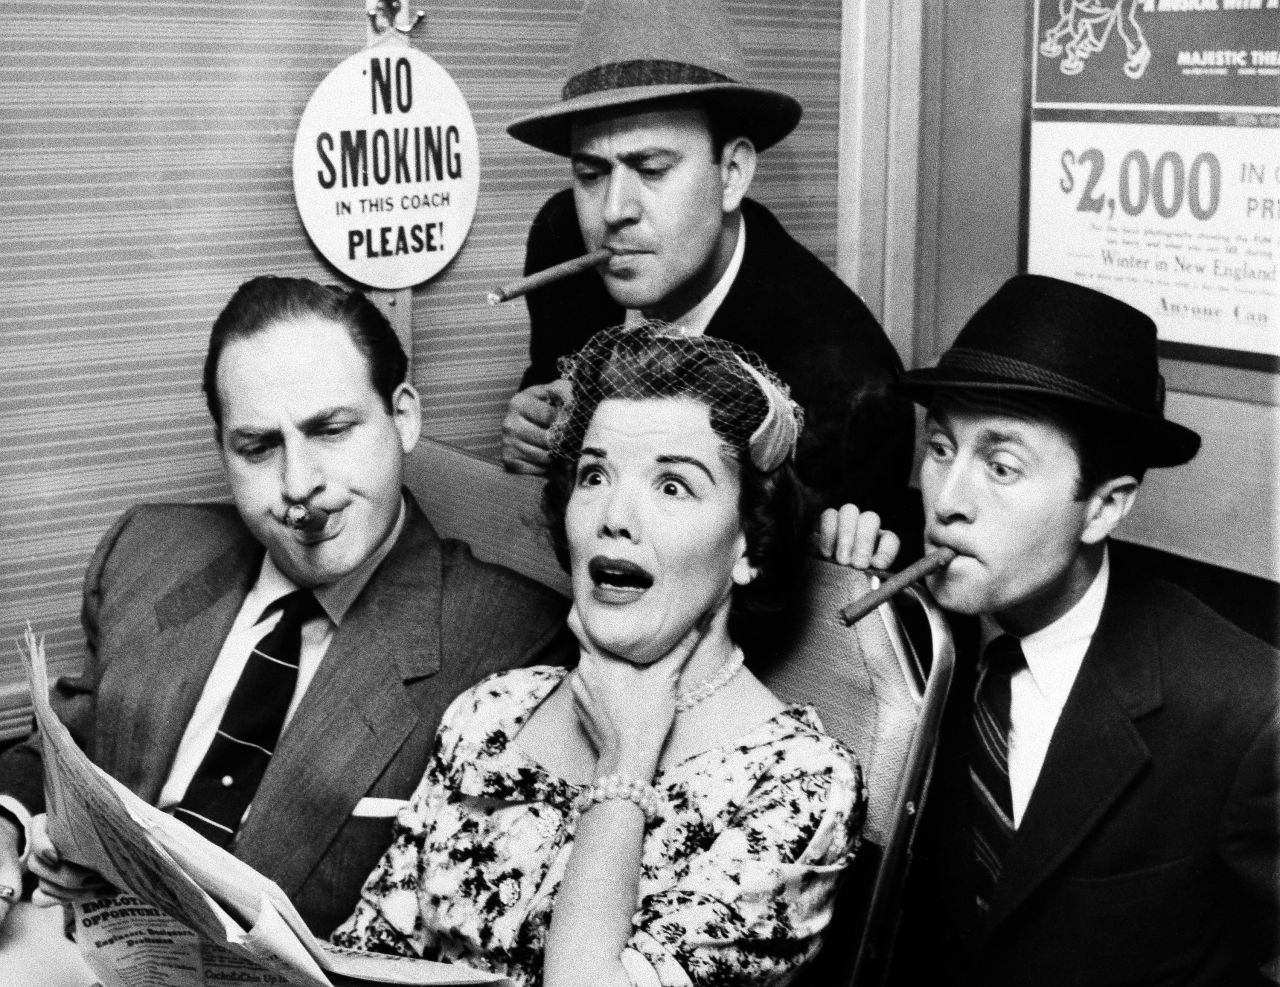 Reiner and Caesar also starred in "Caesar's Hour," from 1954-1957. In this scene from April 1955, Reiner, top center, Caesar, left, and Howard Morris, right, smoke while trying to read Nanette Fabray's newspaper. Reiner won two Emmy Awards for his performance on the show.